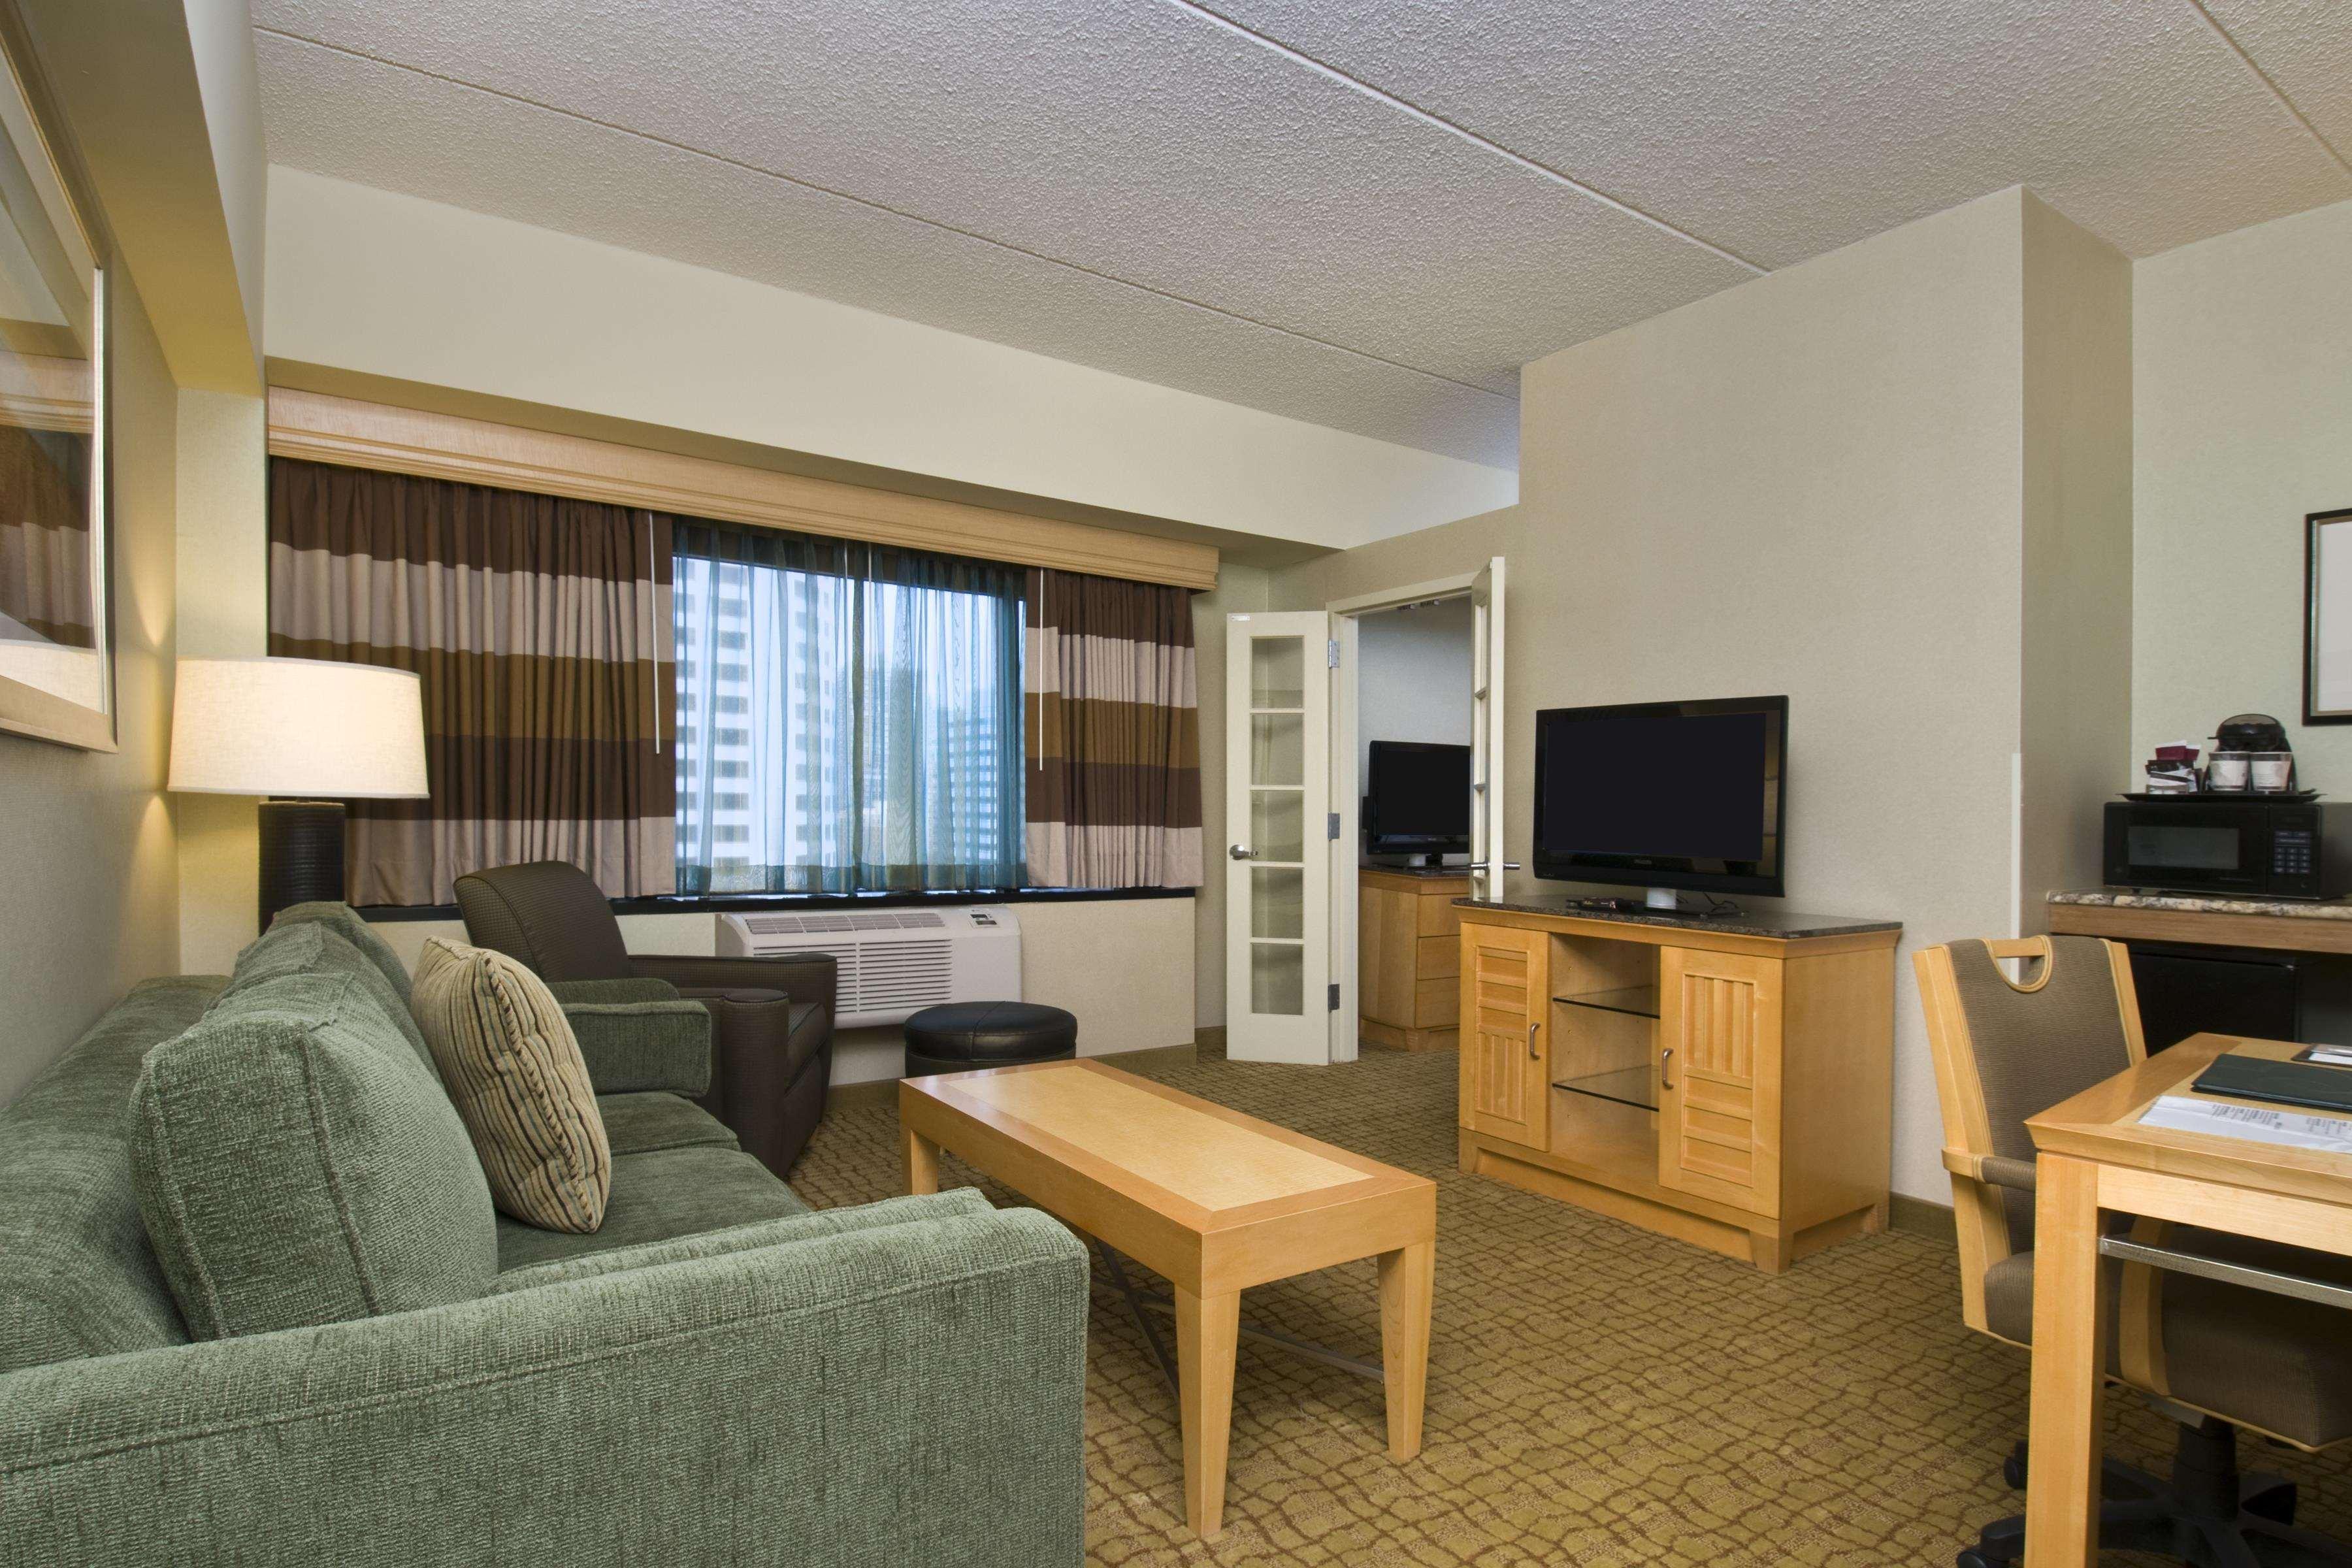 Doubletree By Hilton Hotel & Suites Jersey City Room photo